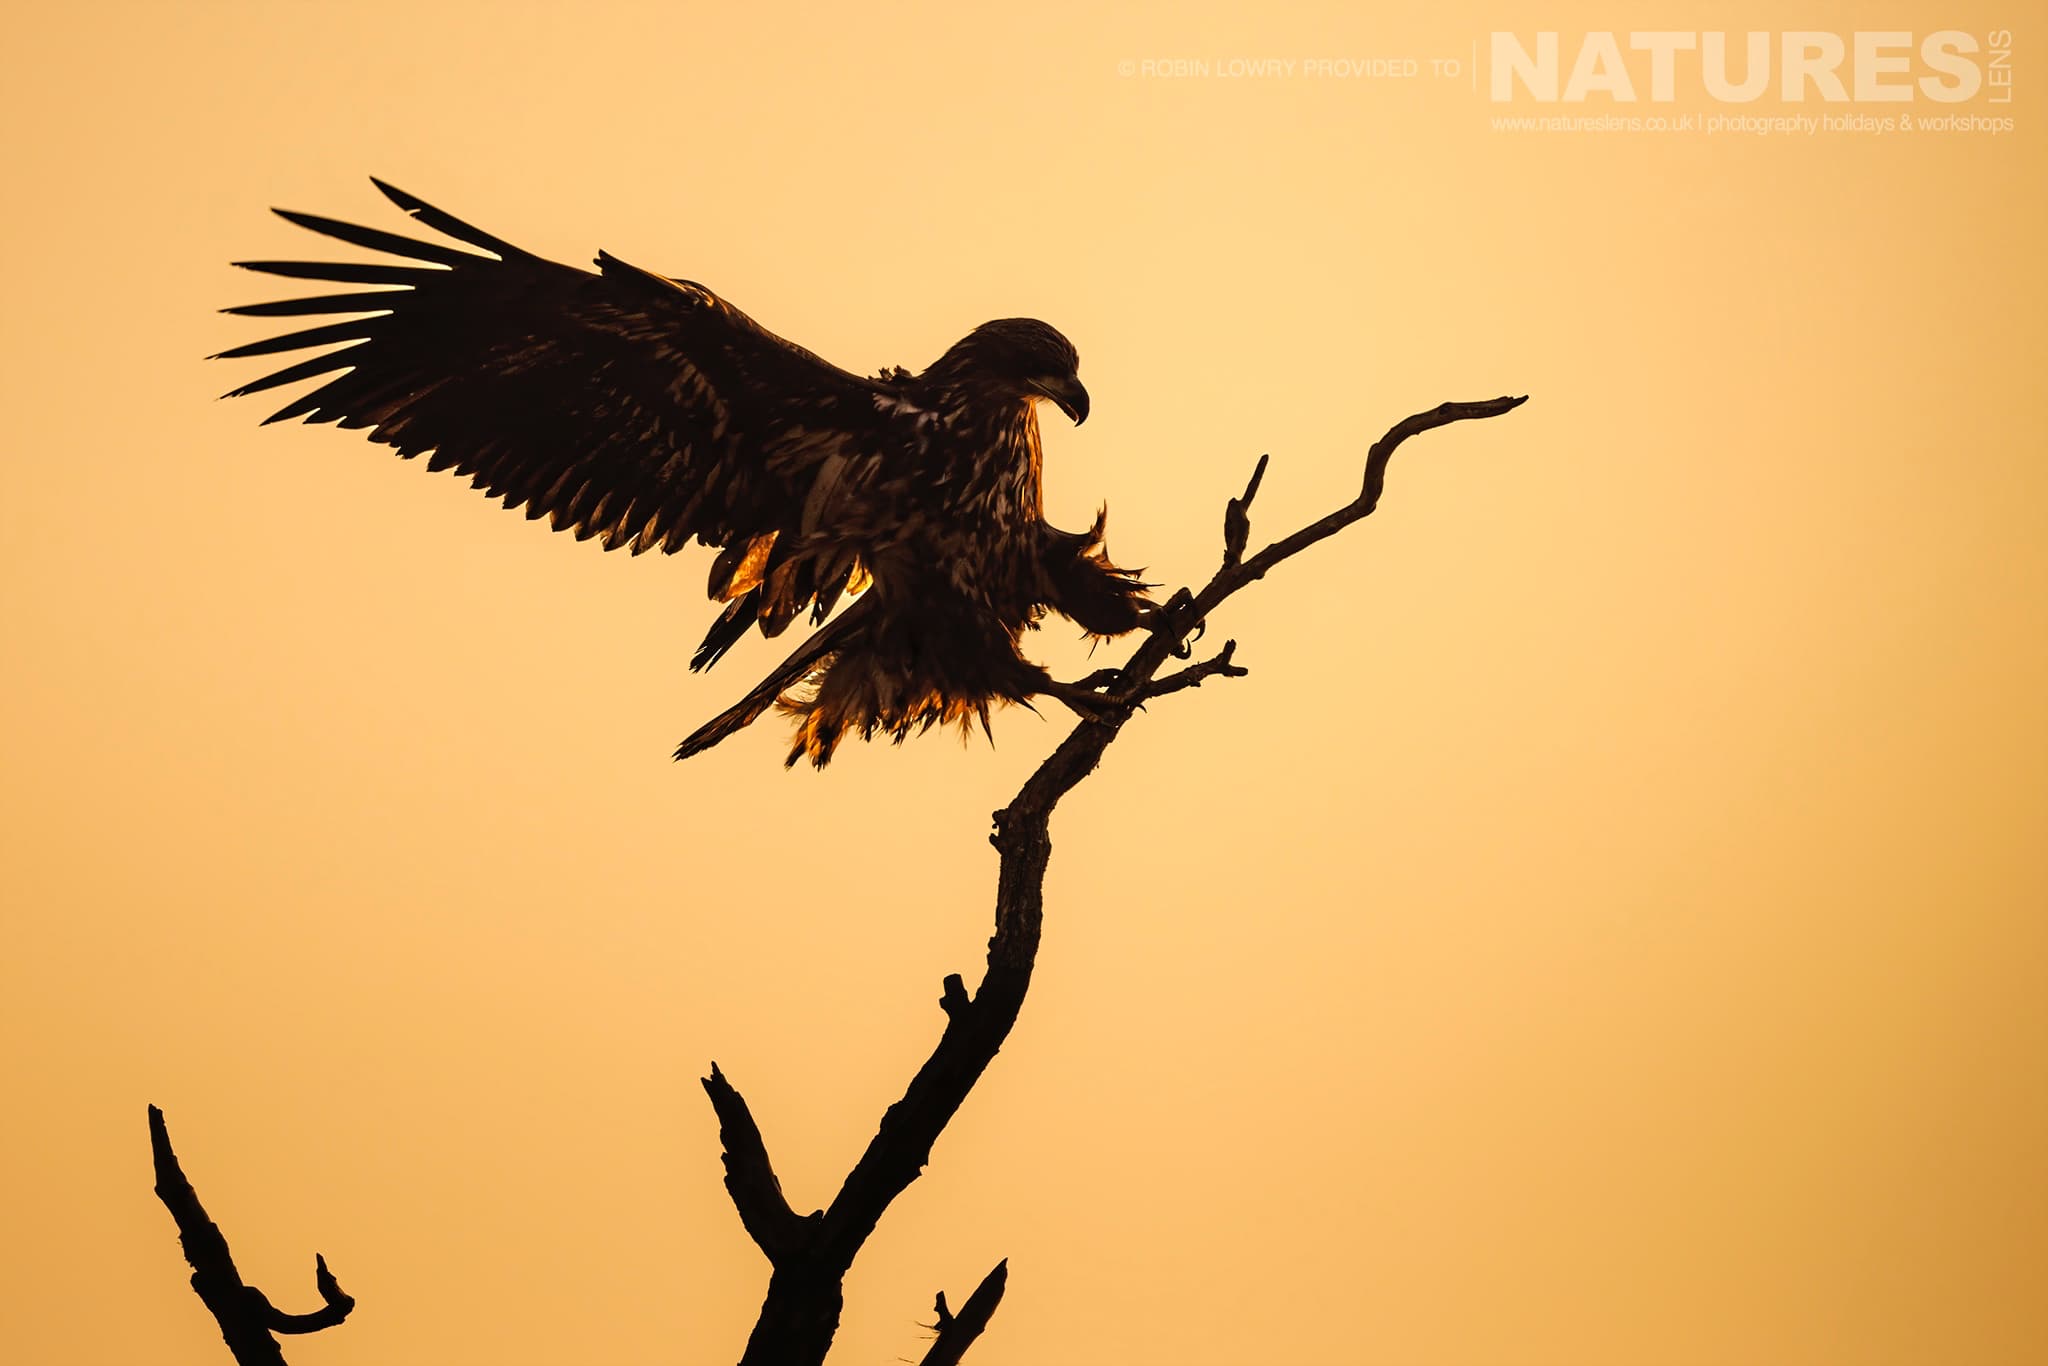 A Silhouetted White Tailed Eagle Lands On A Try Against A Golden Sky The Largest Bird Species Found Amongst The Wildlife Of The Hortobágy National Park In Hungary